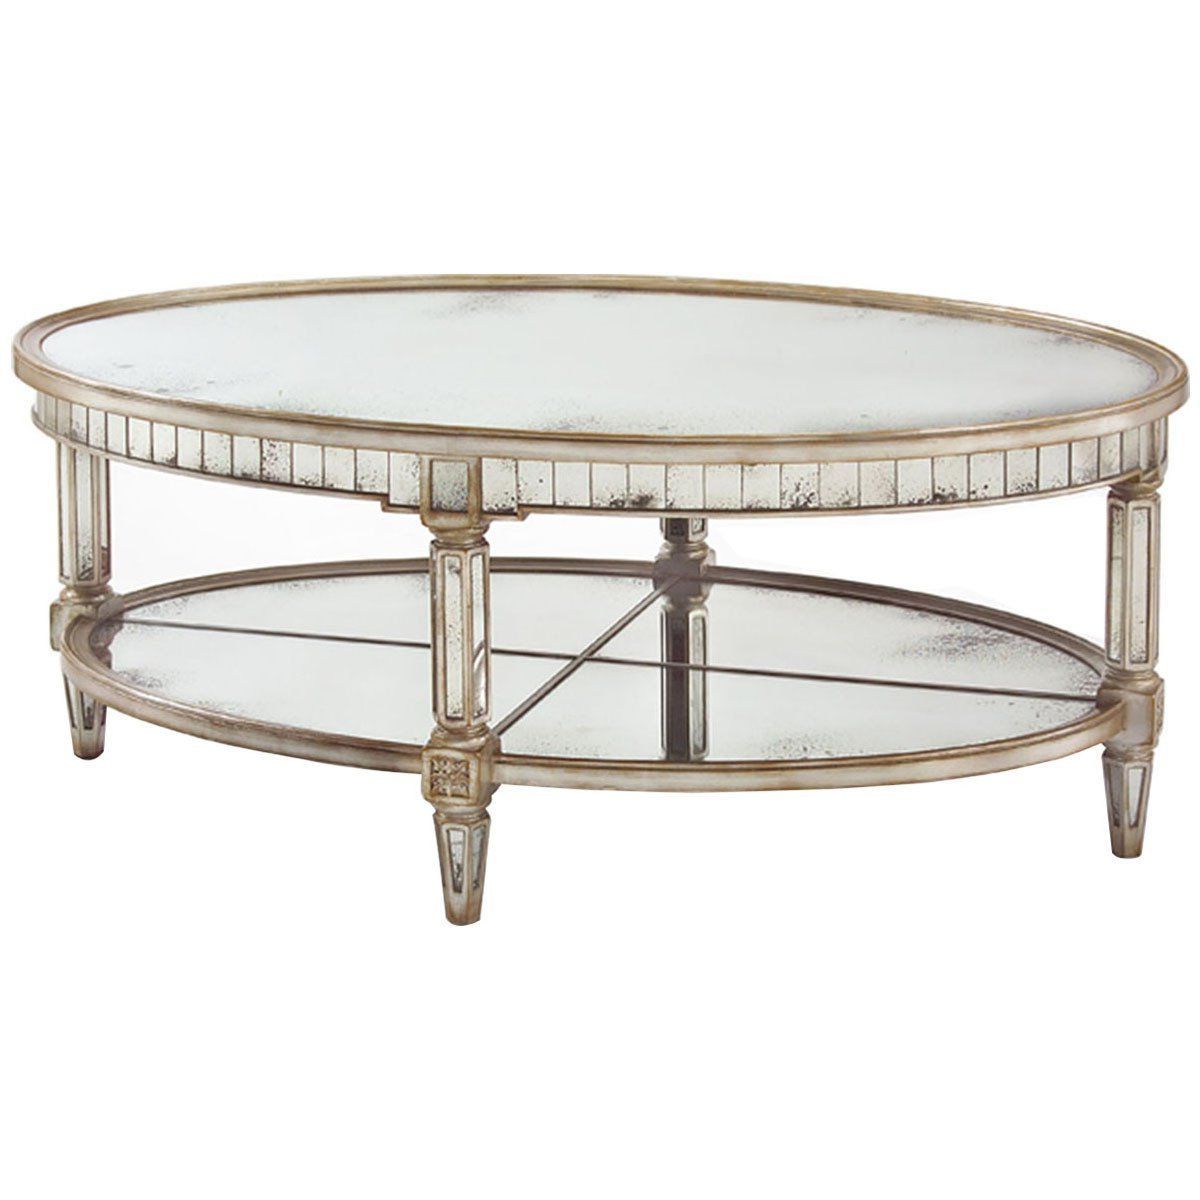 Most Current Antique Silver Metal Coffee Tables Inside John Richard Parisian Silver Keswick Oval Cocktail Table (Gallery 12 of 20)